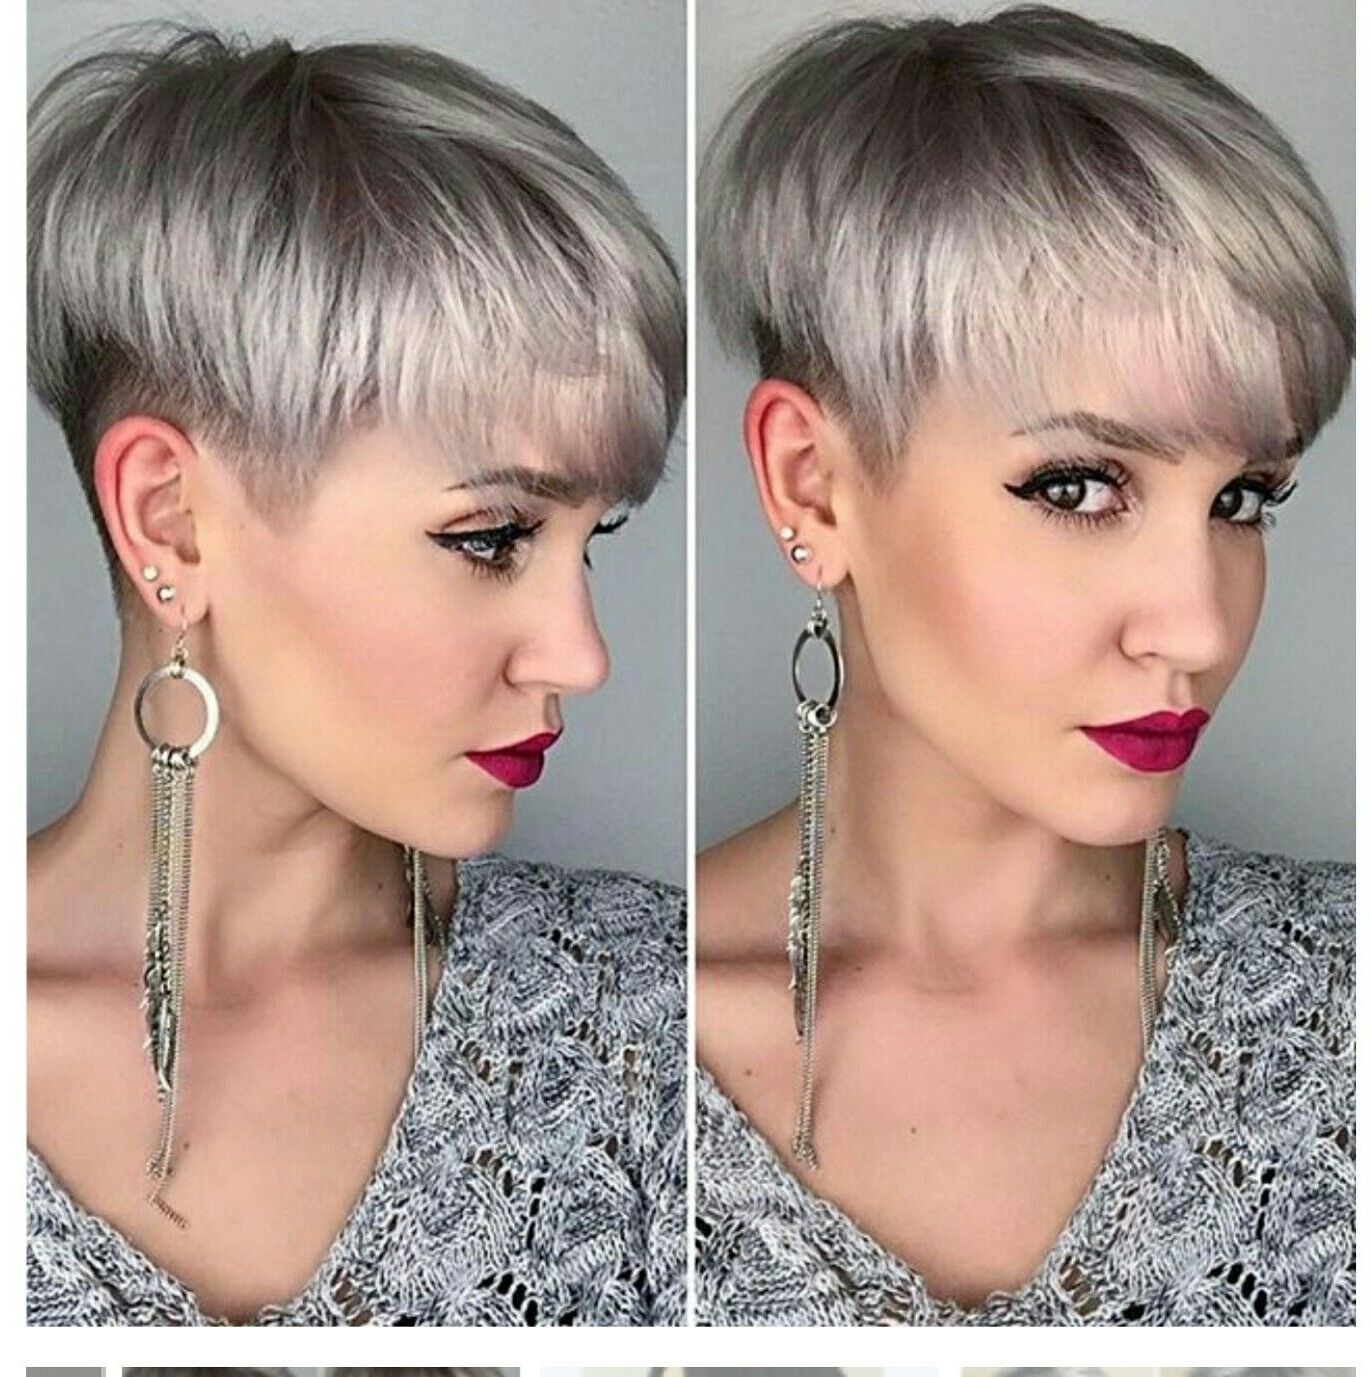 Love This Colour | Hair | Pinterest | Haircuts, Pixies And Hair Style With Regard To Most Recent Sassy Undercut Pixie With Bangs (View 6 of 15)